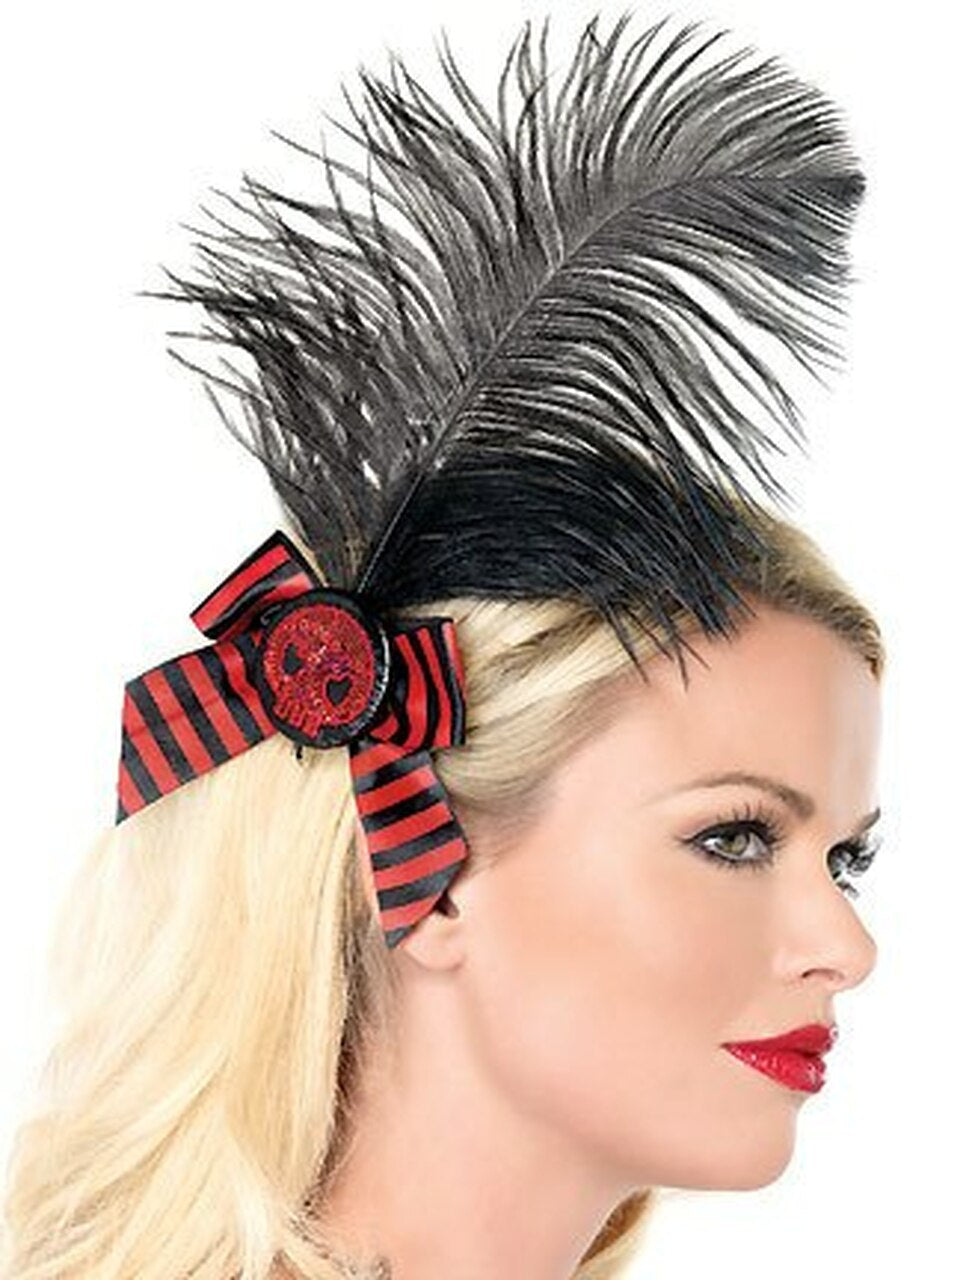 Men's Feathers Hair Clip Extension | Pirate Hair Accessories